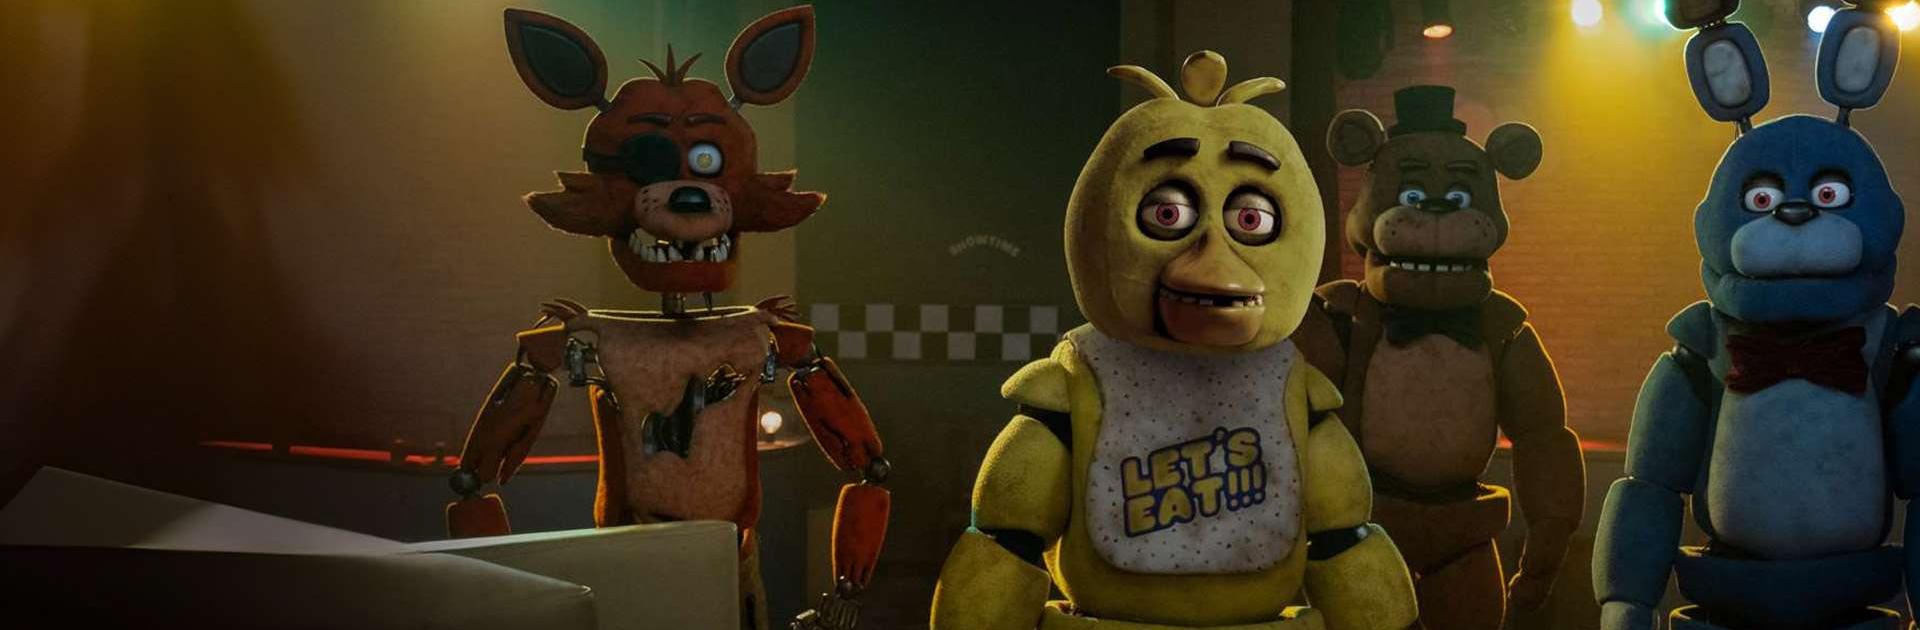 Play Five Nights at Freddy's Online for Free on PC & Mobile